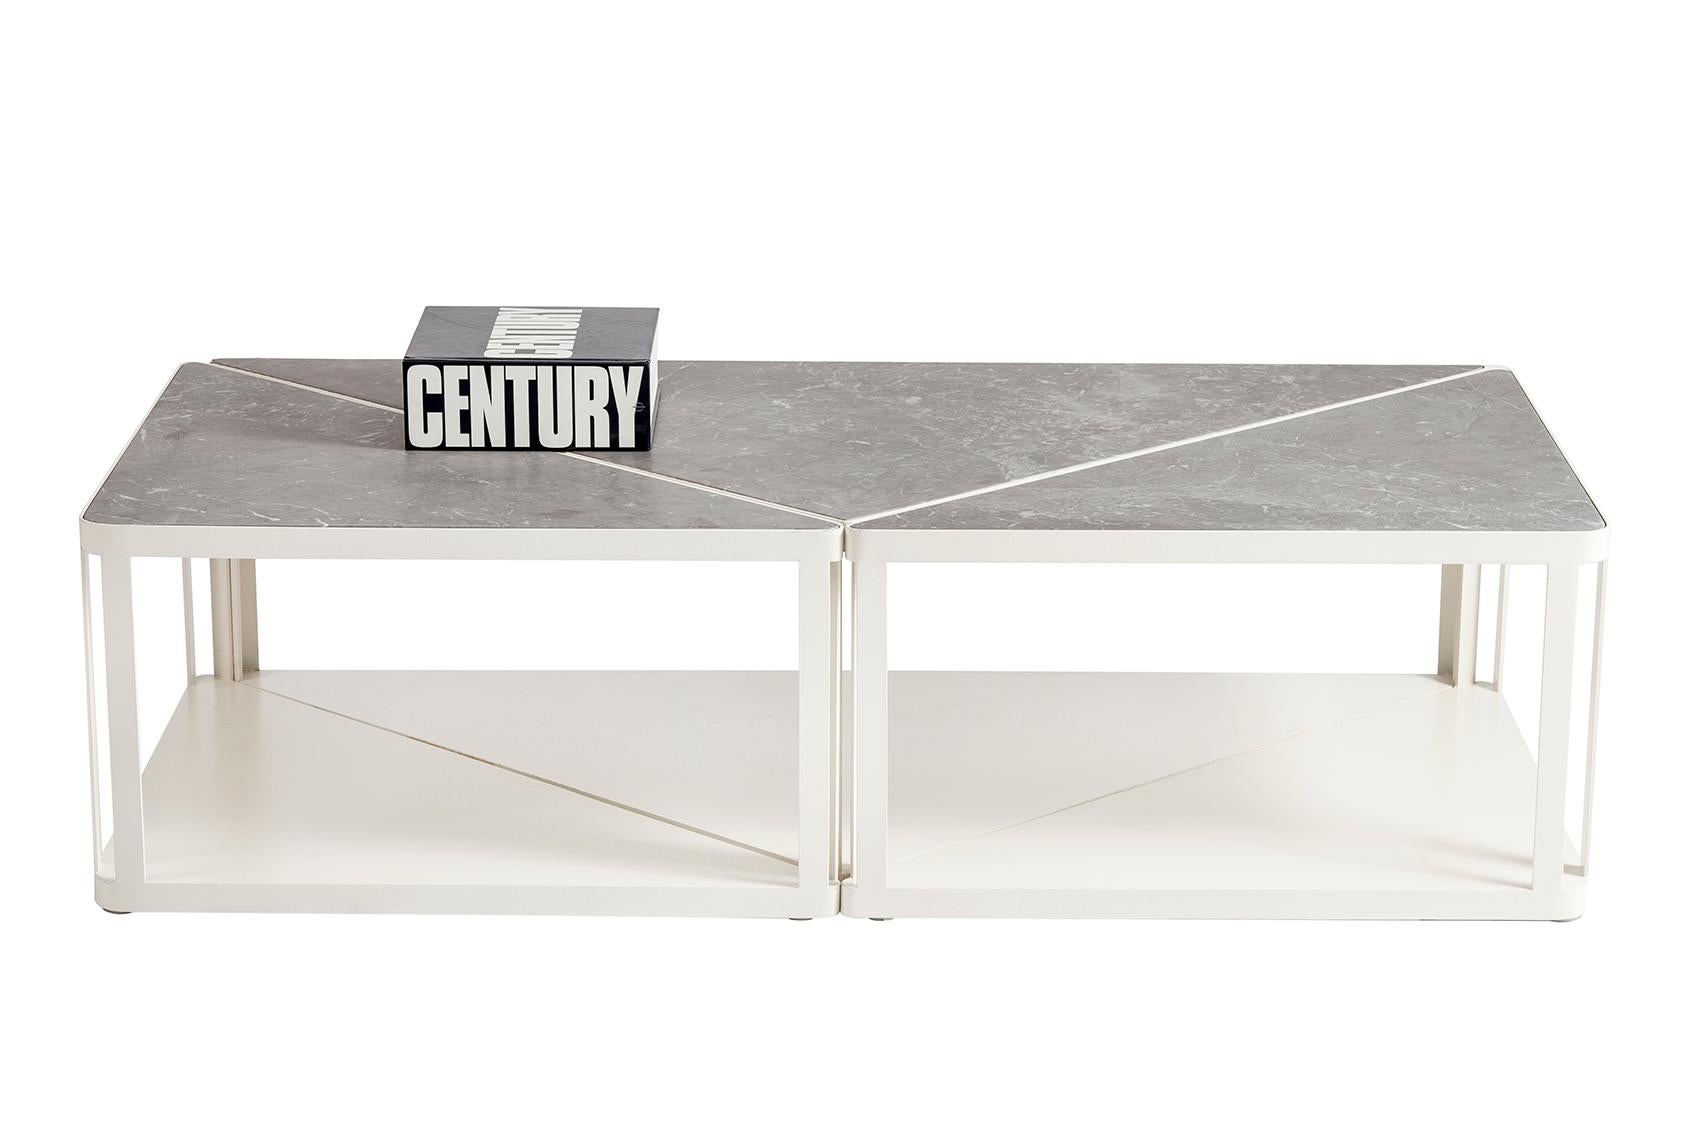 Tri-zone is a centre table with two sides which consists marble top and a metal body.